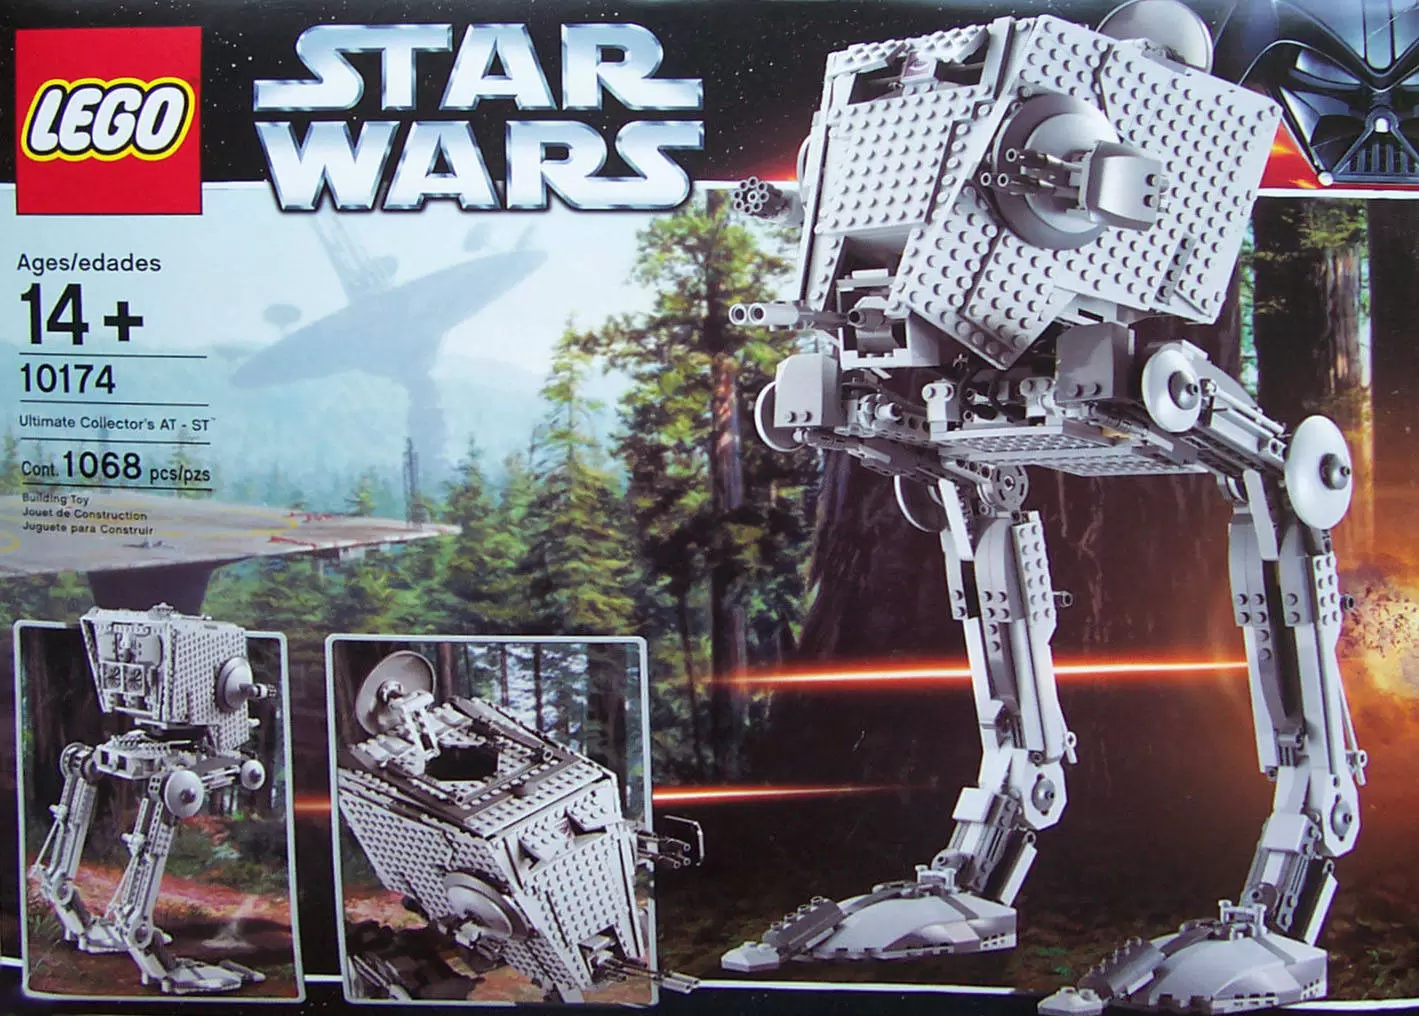 LEGO Star Wars - Imperial AT-ST